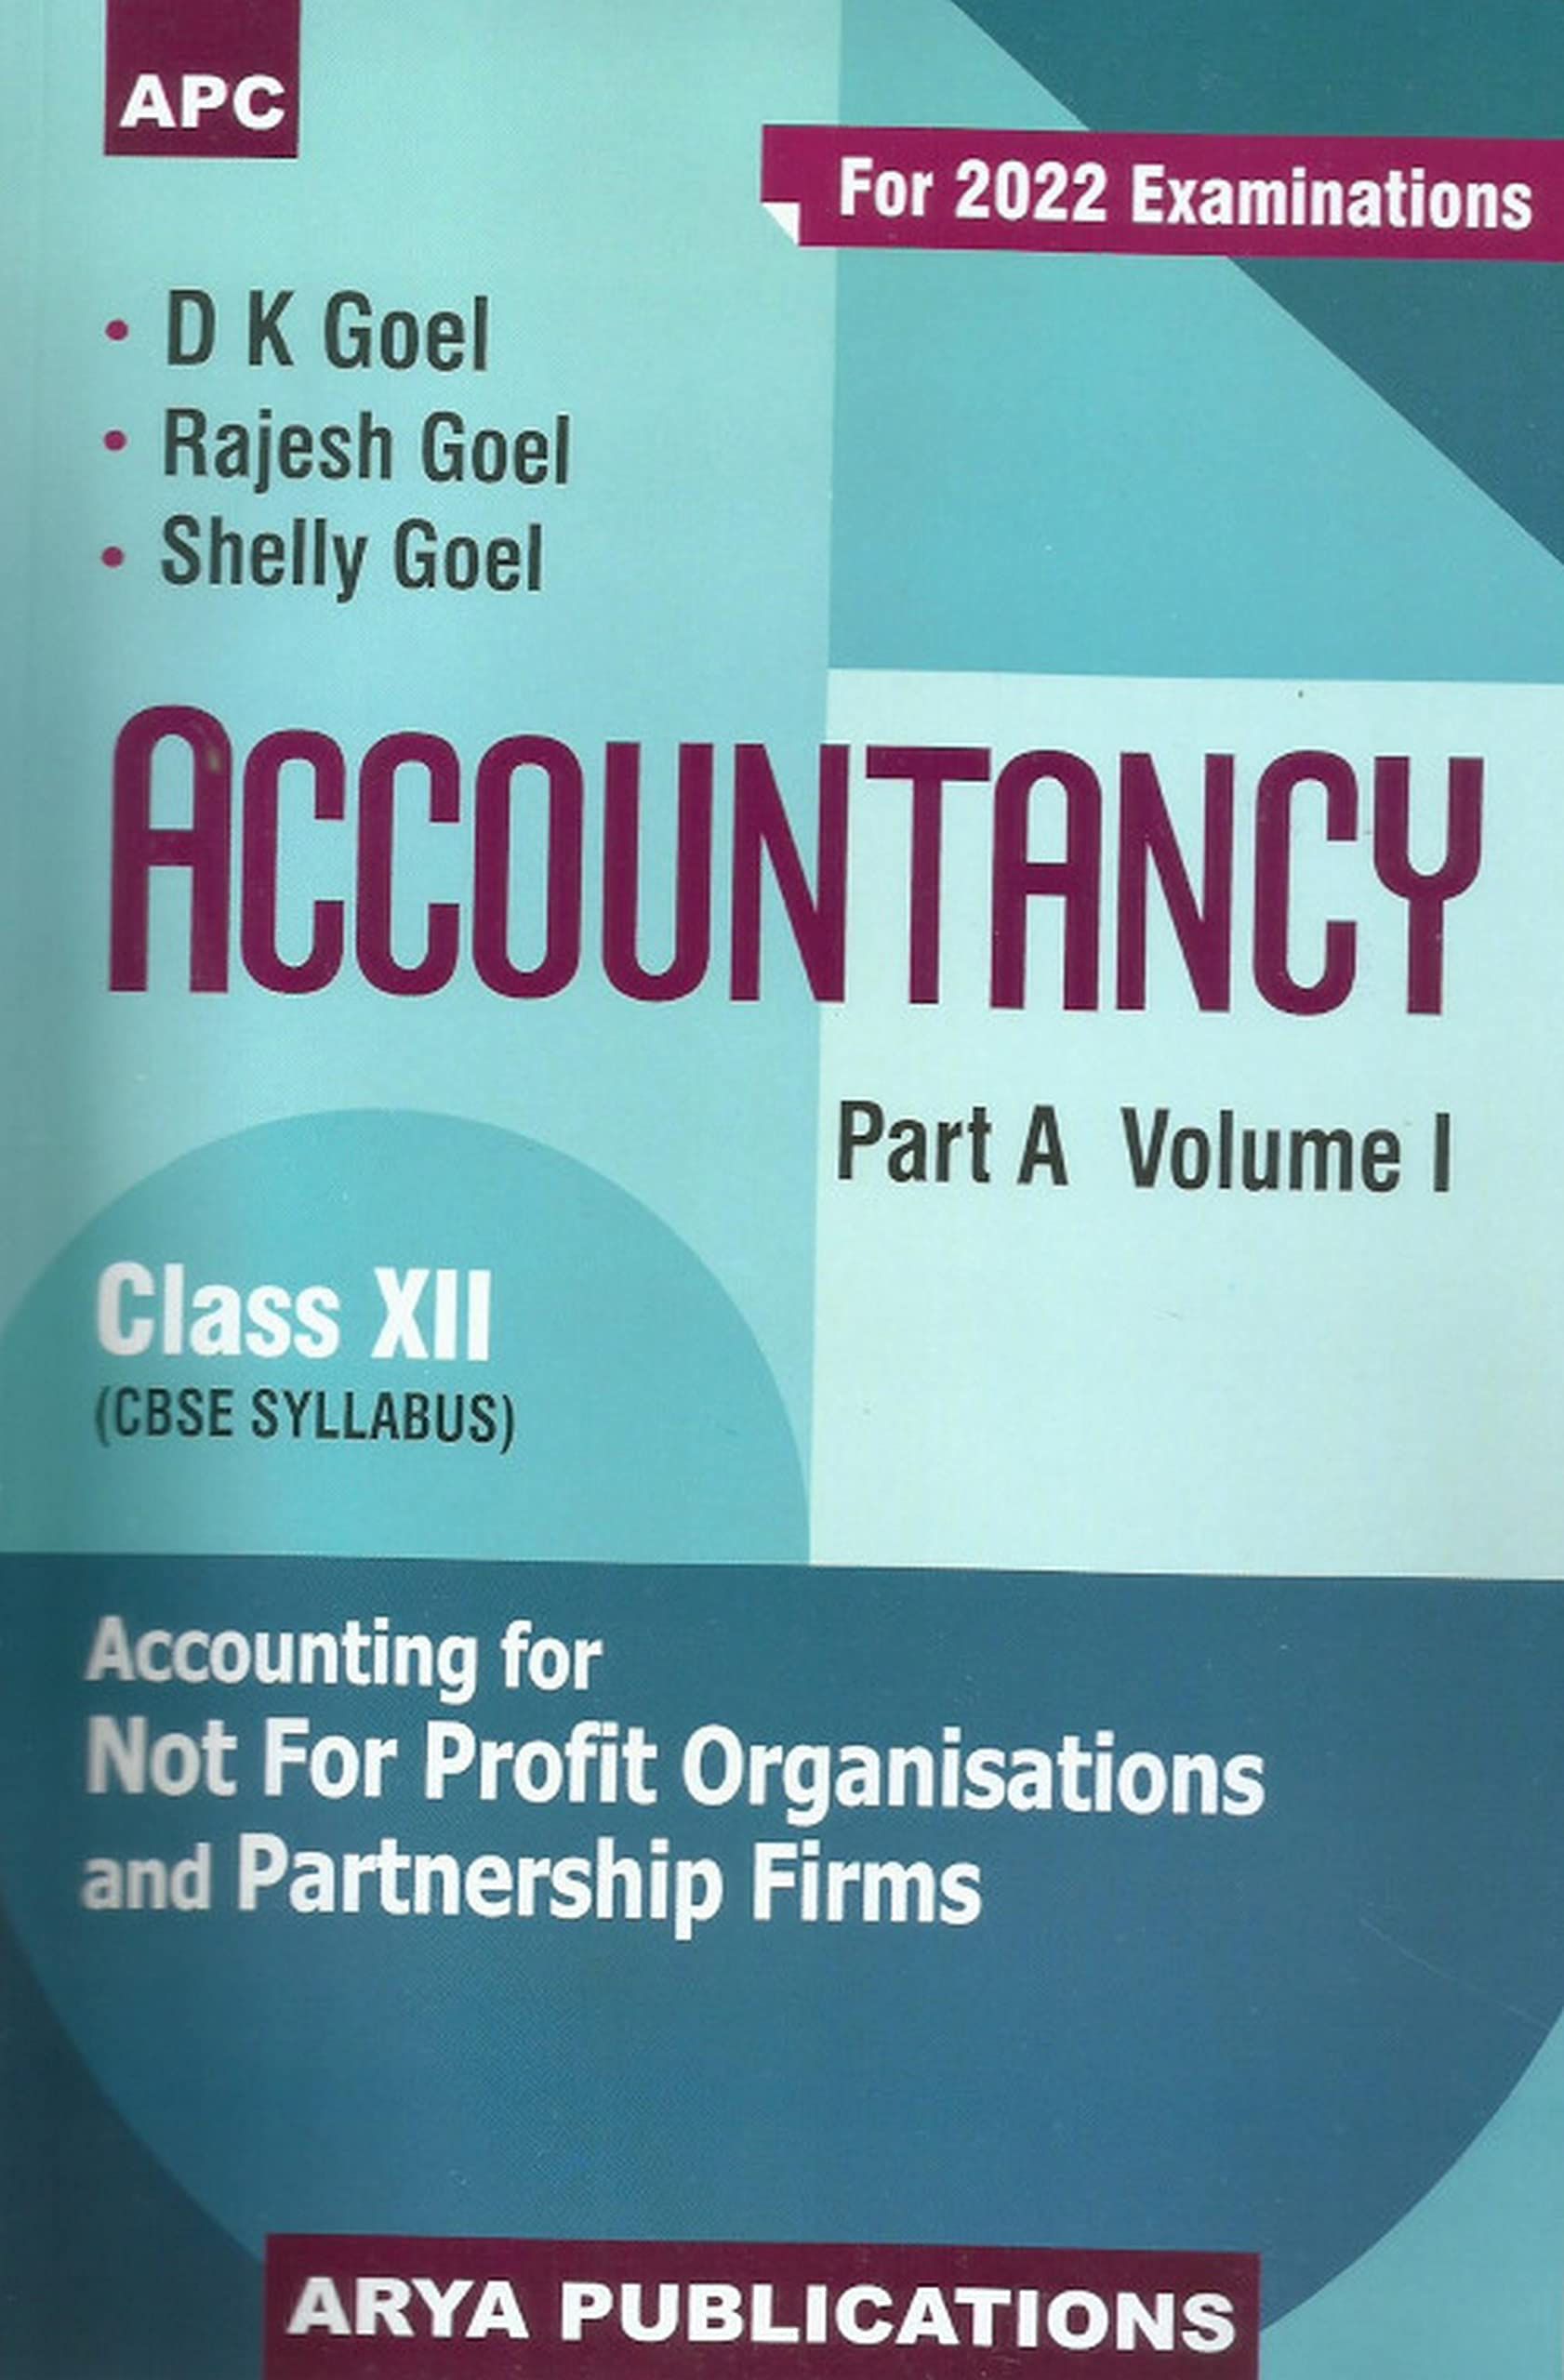     			APC Accountancy Part A Vol 1 for Class 12 - Accounting For Not For Profit Organisations and Partnership Firms (CBSE Syllabus) by D.K. Goel, Rajesh Goel and Shelly Goel